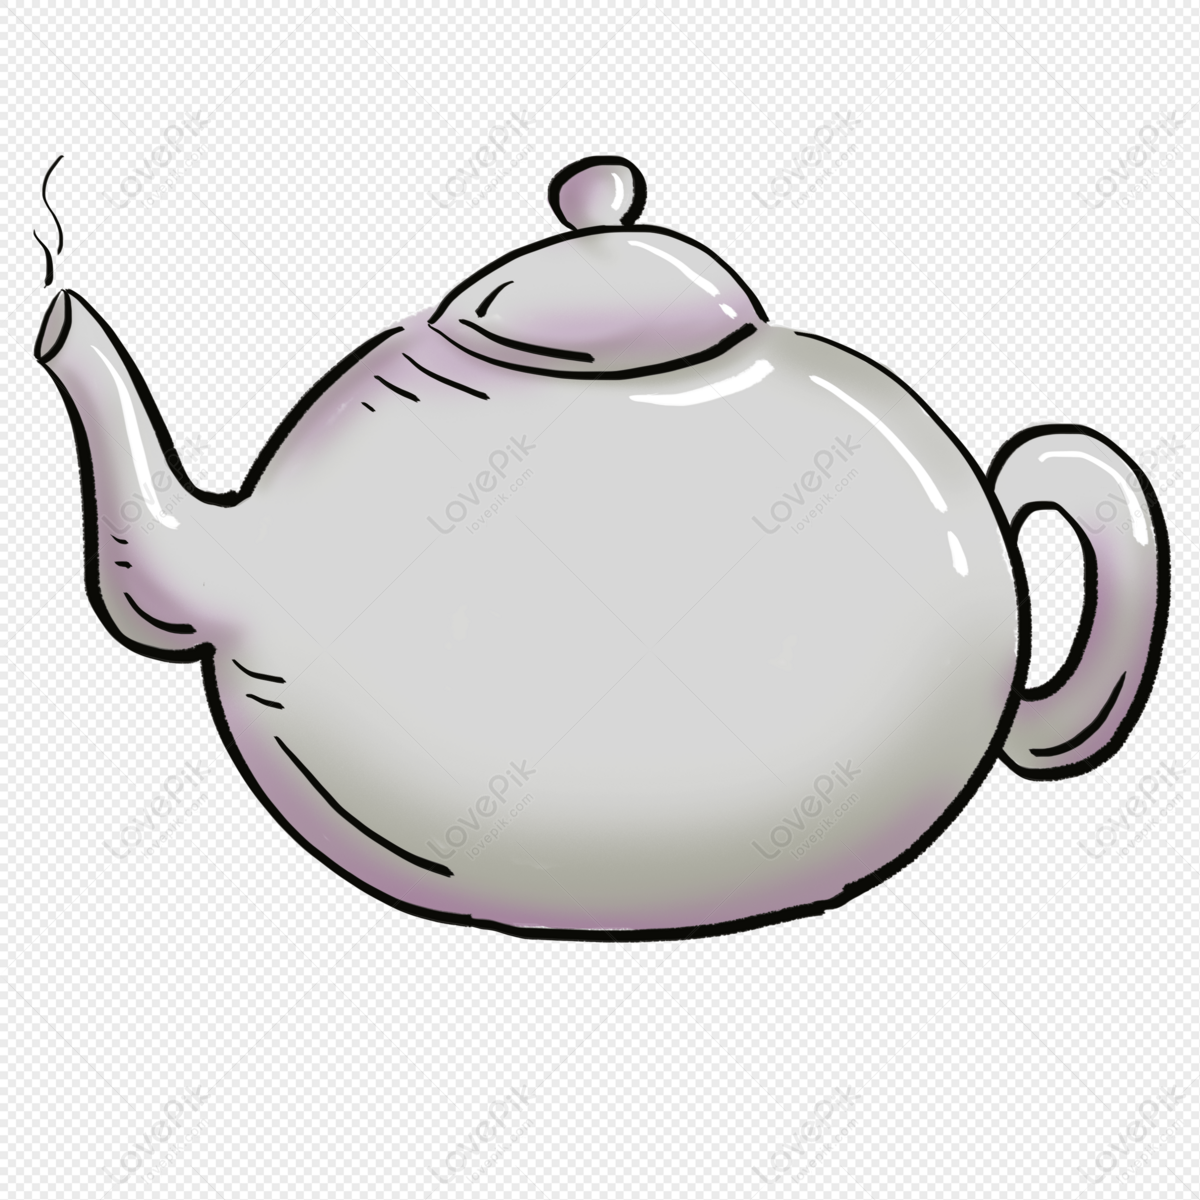 Hand Painted Cartoon Teapot Border Dialog Box Free Material PNG Hd  Transparent Image And Clipart Image For Free Download - Lovepik | 401417184